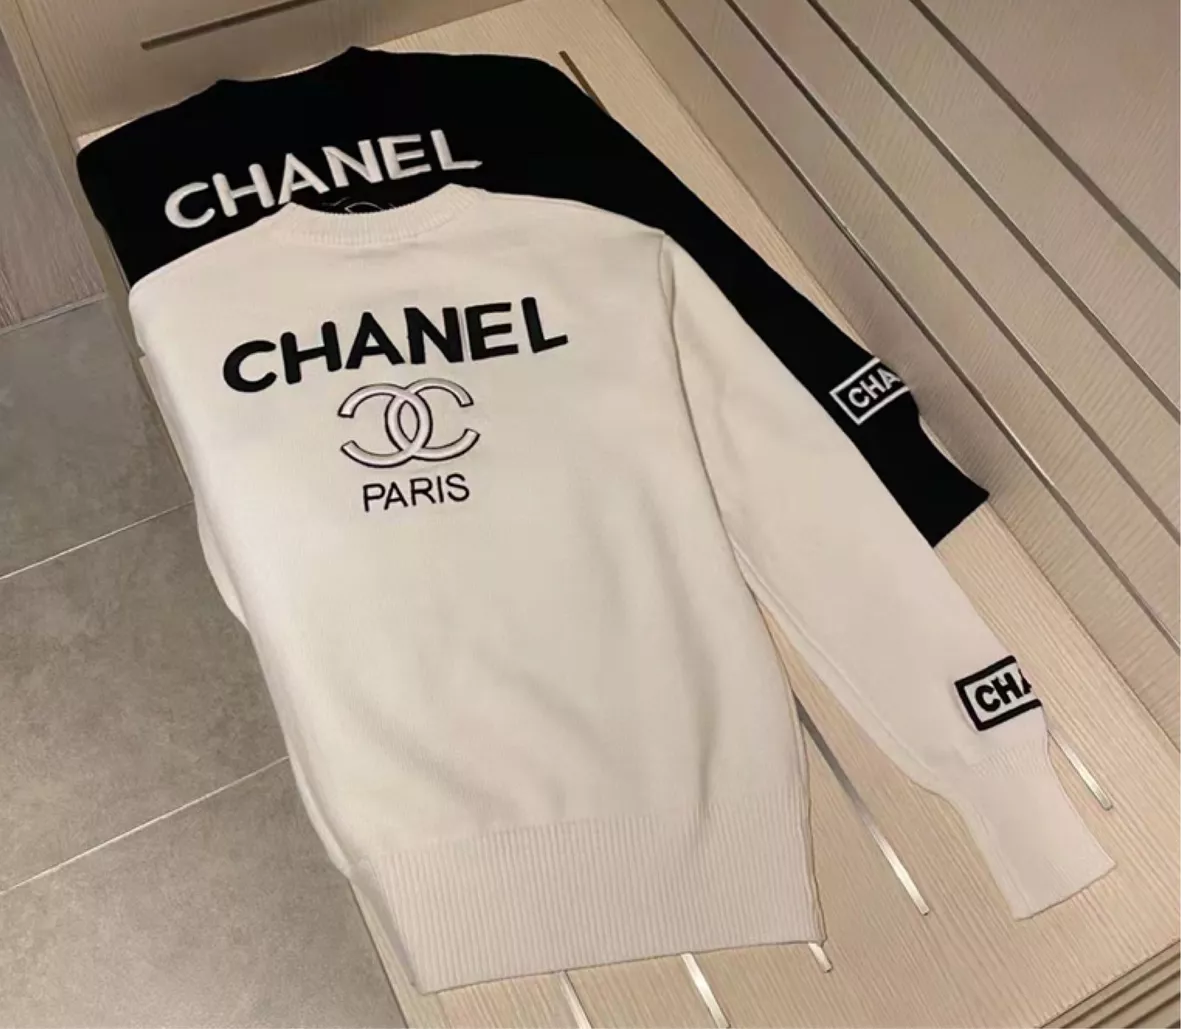 chanel top dhgate